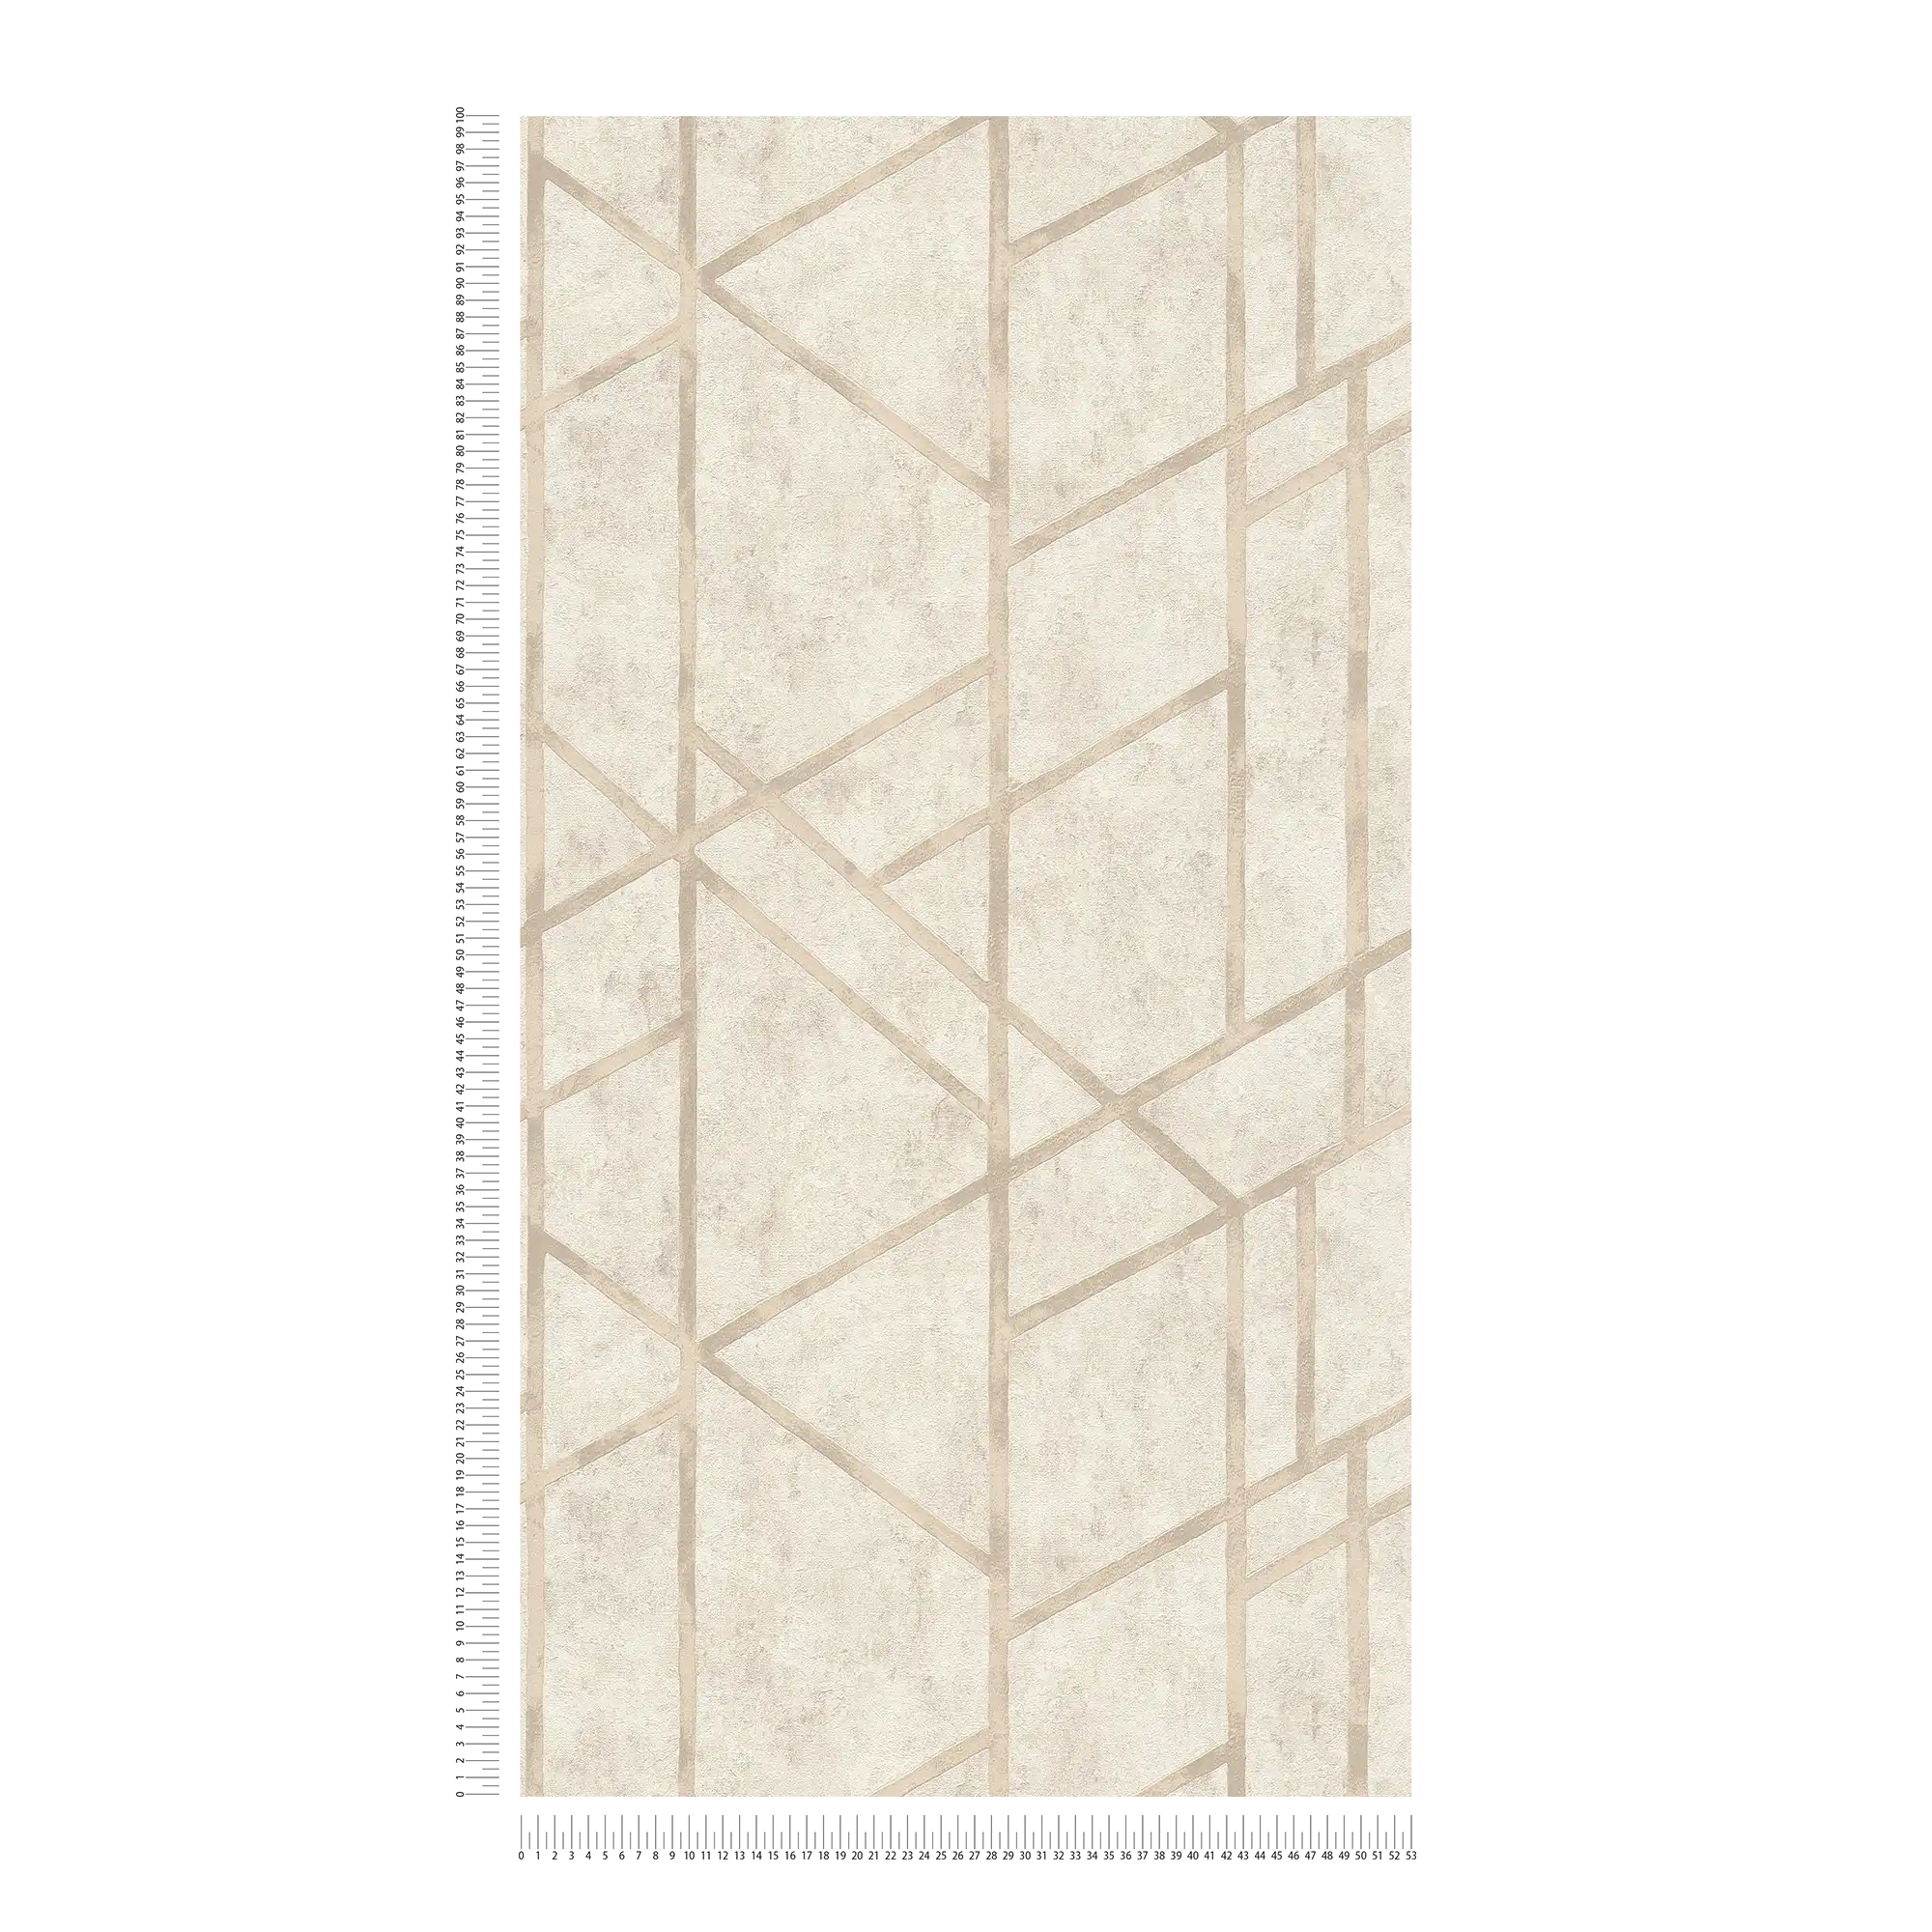             Concrete wallpaper with golden lines pattern - cream
        